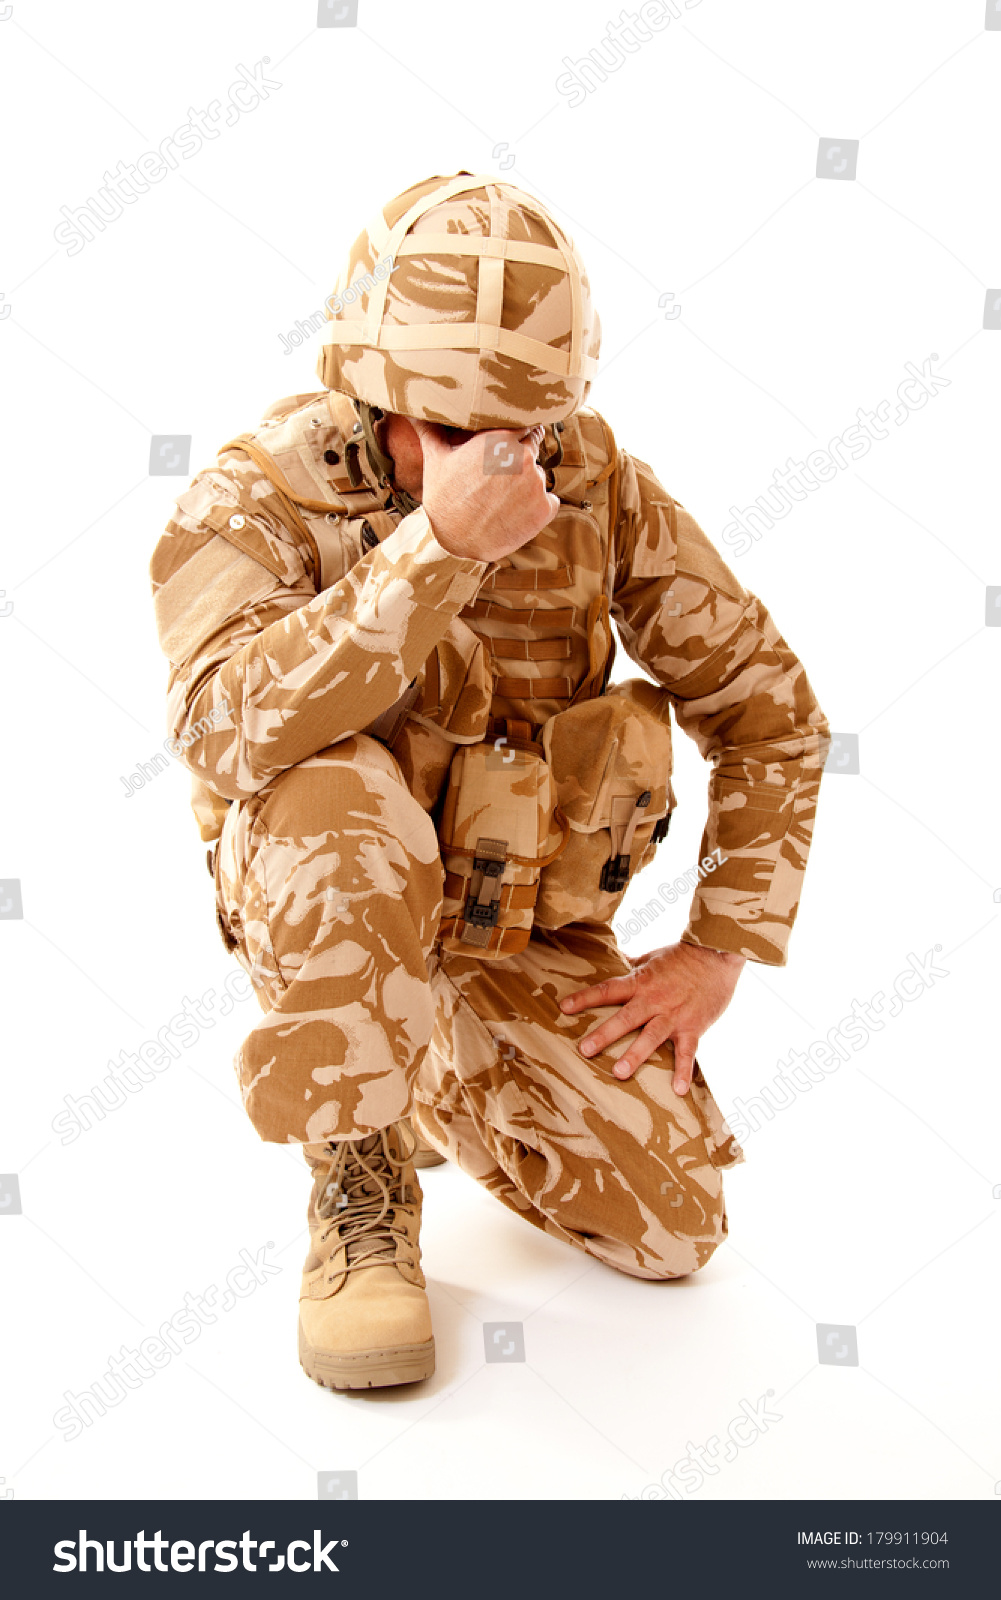 stock-photo-a-distraught-soldier-on-one-knee-with-one-hand-covering-his-face-possibly-suffering-from-shell-179911904.jpg